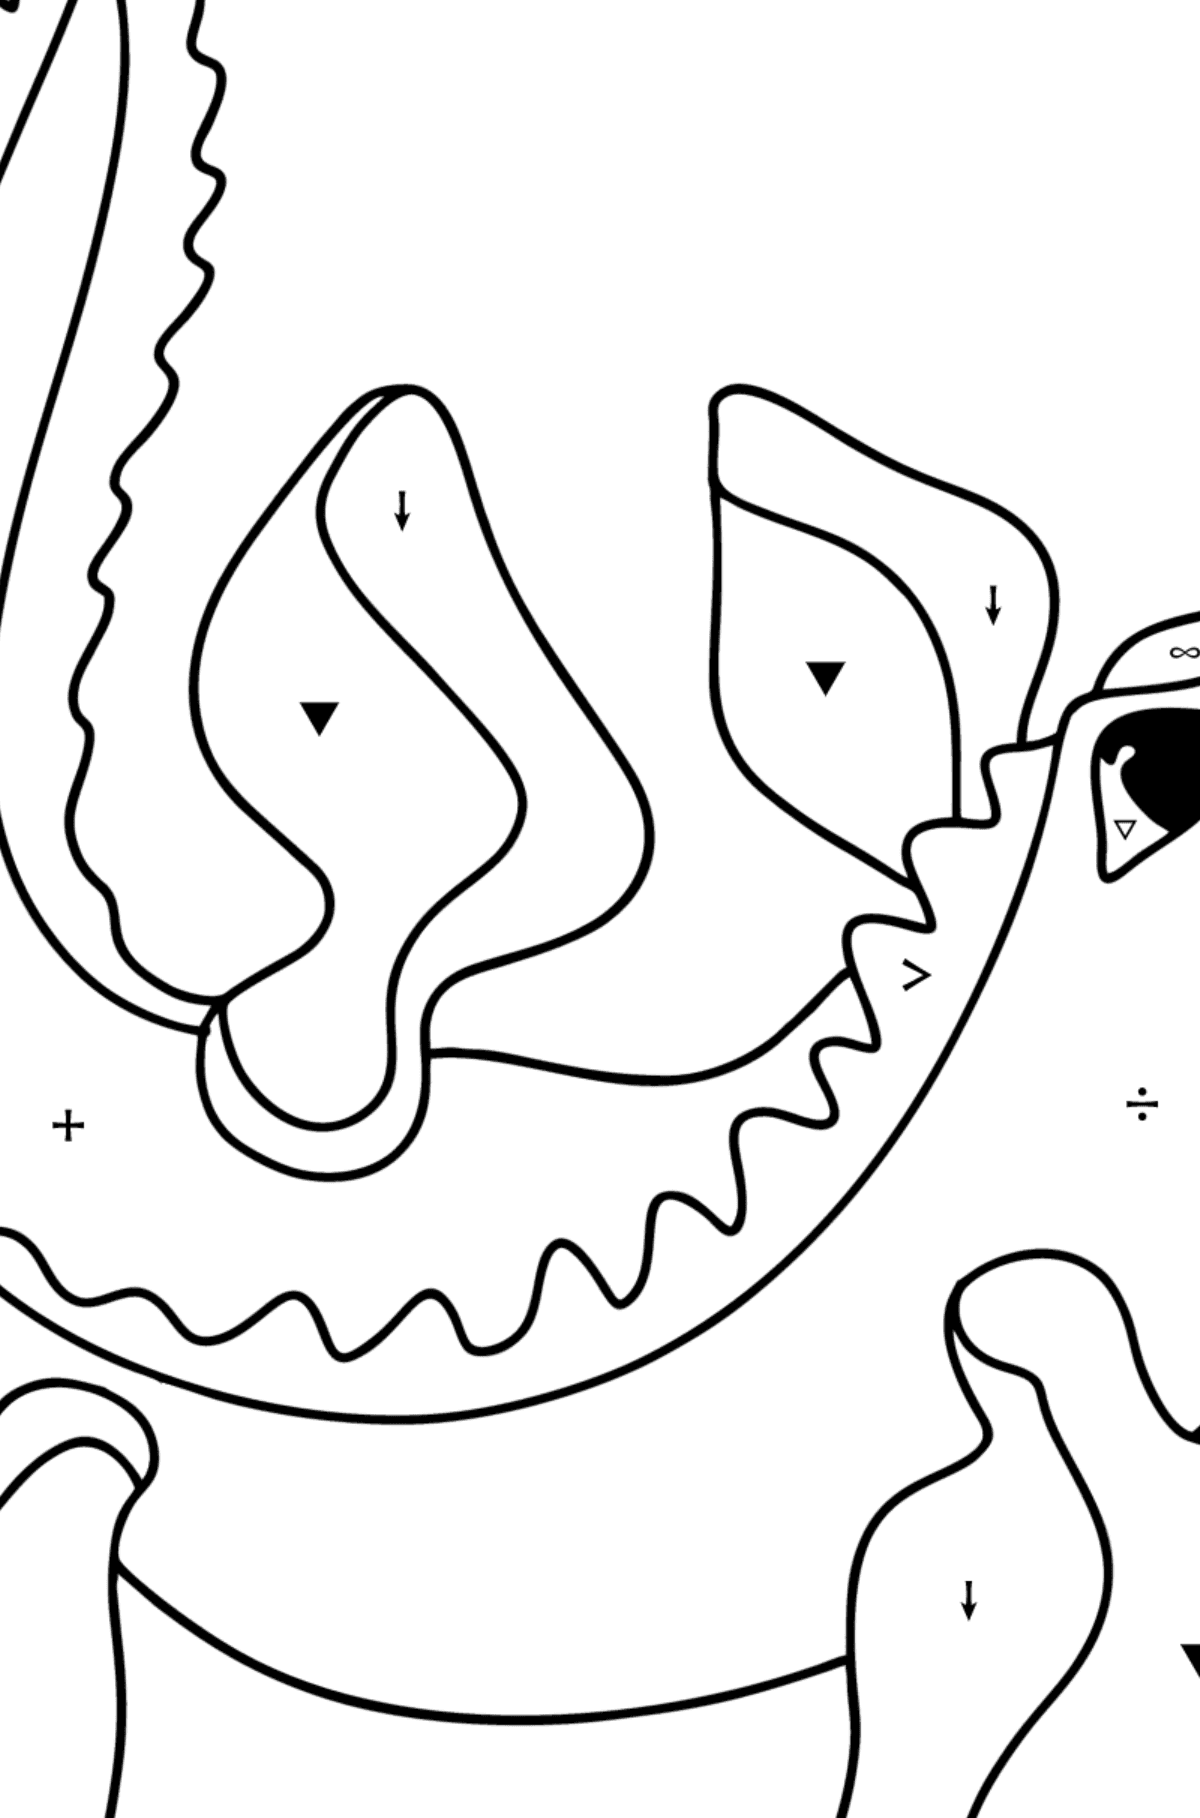 Mosasaurus coloring page - Coloring by Symbols for Kids